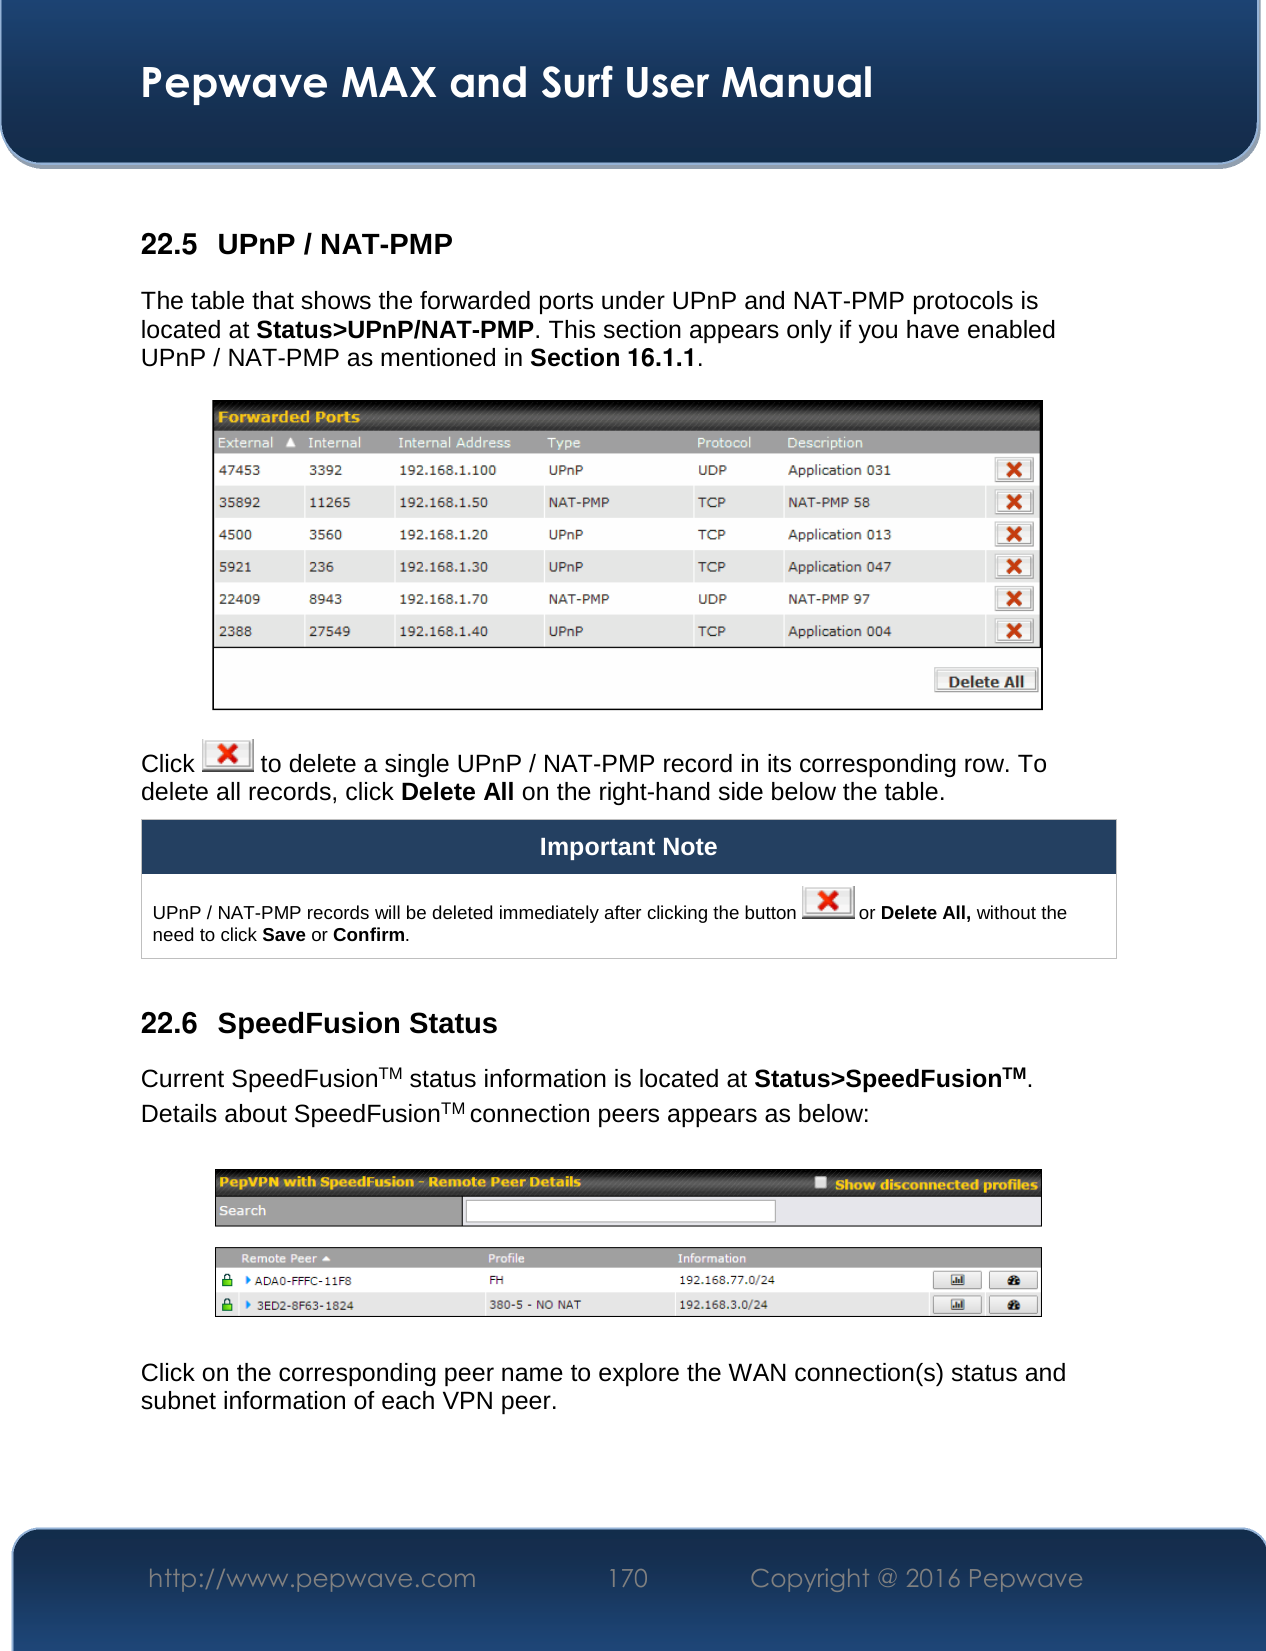  Pepwave MAX and Surf User Manual http://www.pepwave.com  170    Copyright @ 2016 Pepwave    22.5  UPnP / NAT-PMP The table that shows the forwarded ports under UPnP and NAT-PMP protocols is located at Status&gt;UPnP/NAT-PMP. This section appears only if you have enabled UPnP / NAT-PMP as mentioned in Section 16.1.1.  Click   to delete a single UPnP / NAT-PMP record in its corresponding row. To delete all records, click Delete All on the right-hand side below the table. Important Note UPnP / NAT-PMP records will be deleted immediately after clicking the button   or Delete All, without the need to click Save or Confirm.  22.6  SpeedFusion Status Current SpeedFusionTM status information is located at Status&gt;SpeedFusionTM. Details about SpeedFusionTM connection peers appears as below:    Click on the corresponding peer name to explore the WAN connection(s) status and subnet information of each VPN peer. 